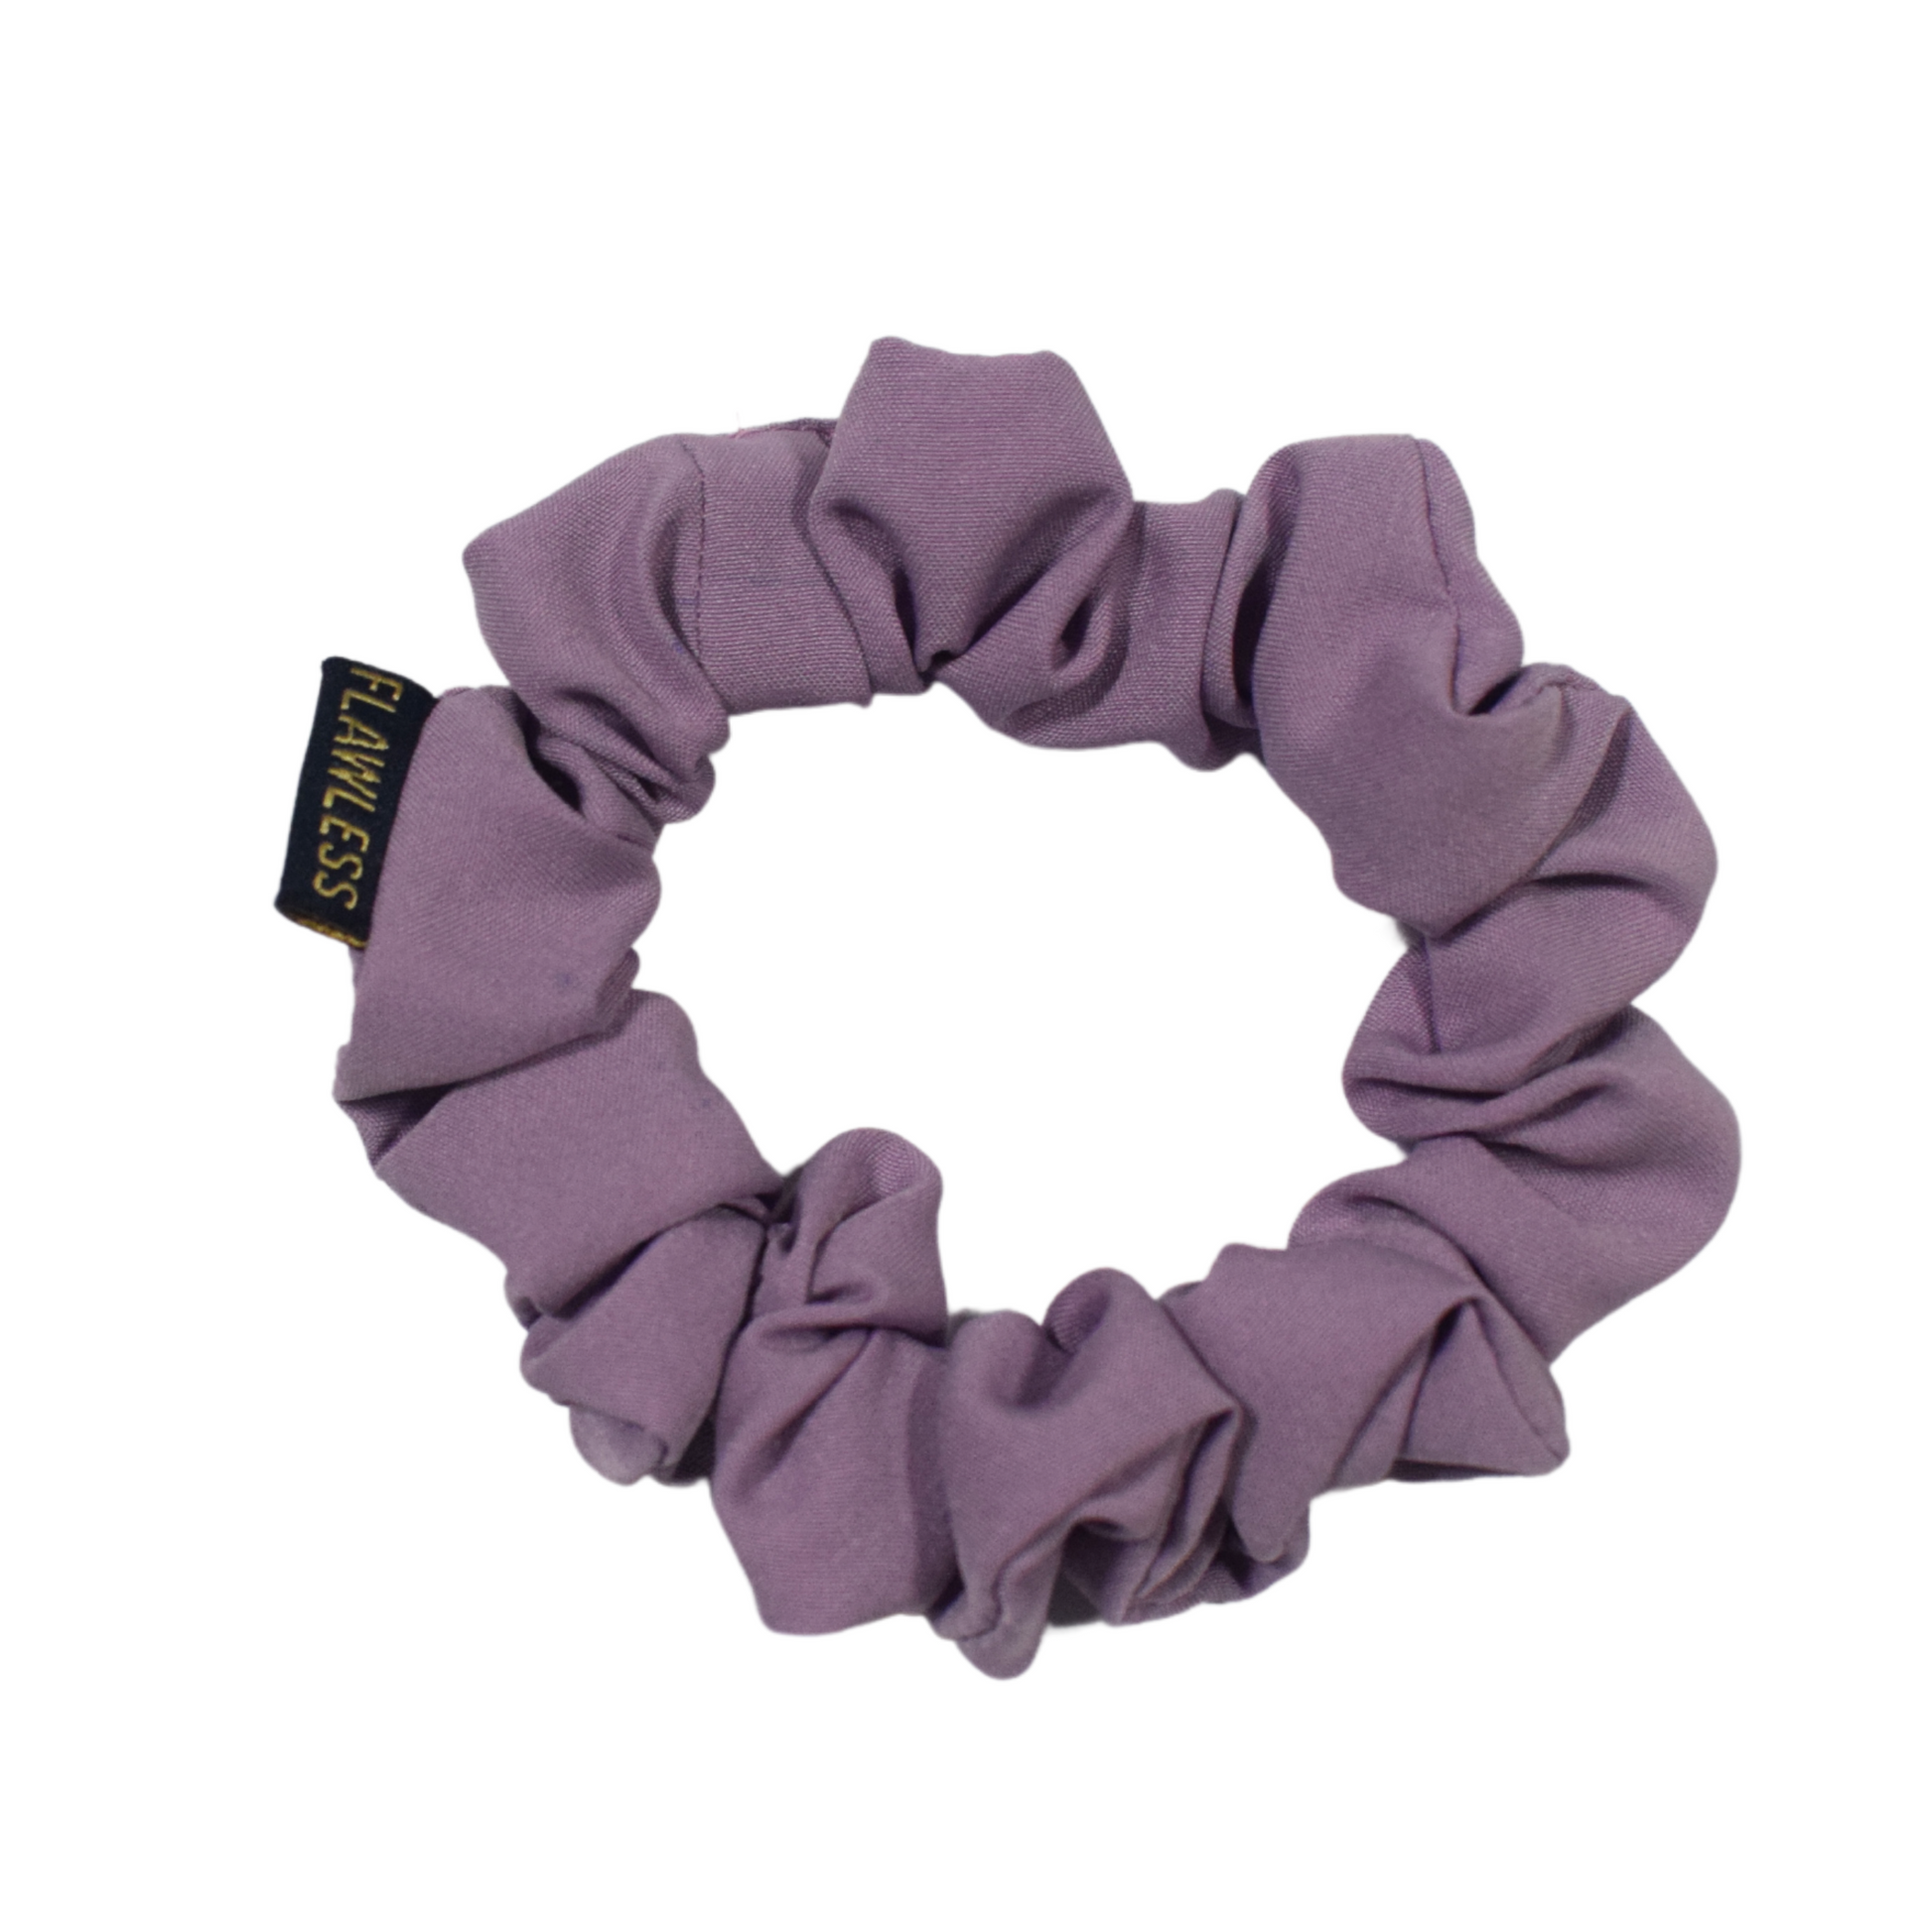 Flawless Soft Polycrepe Purple Scrunchies (Set of 2) Being Flawless